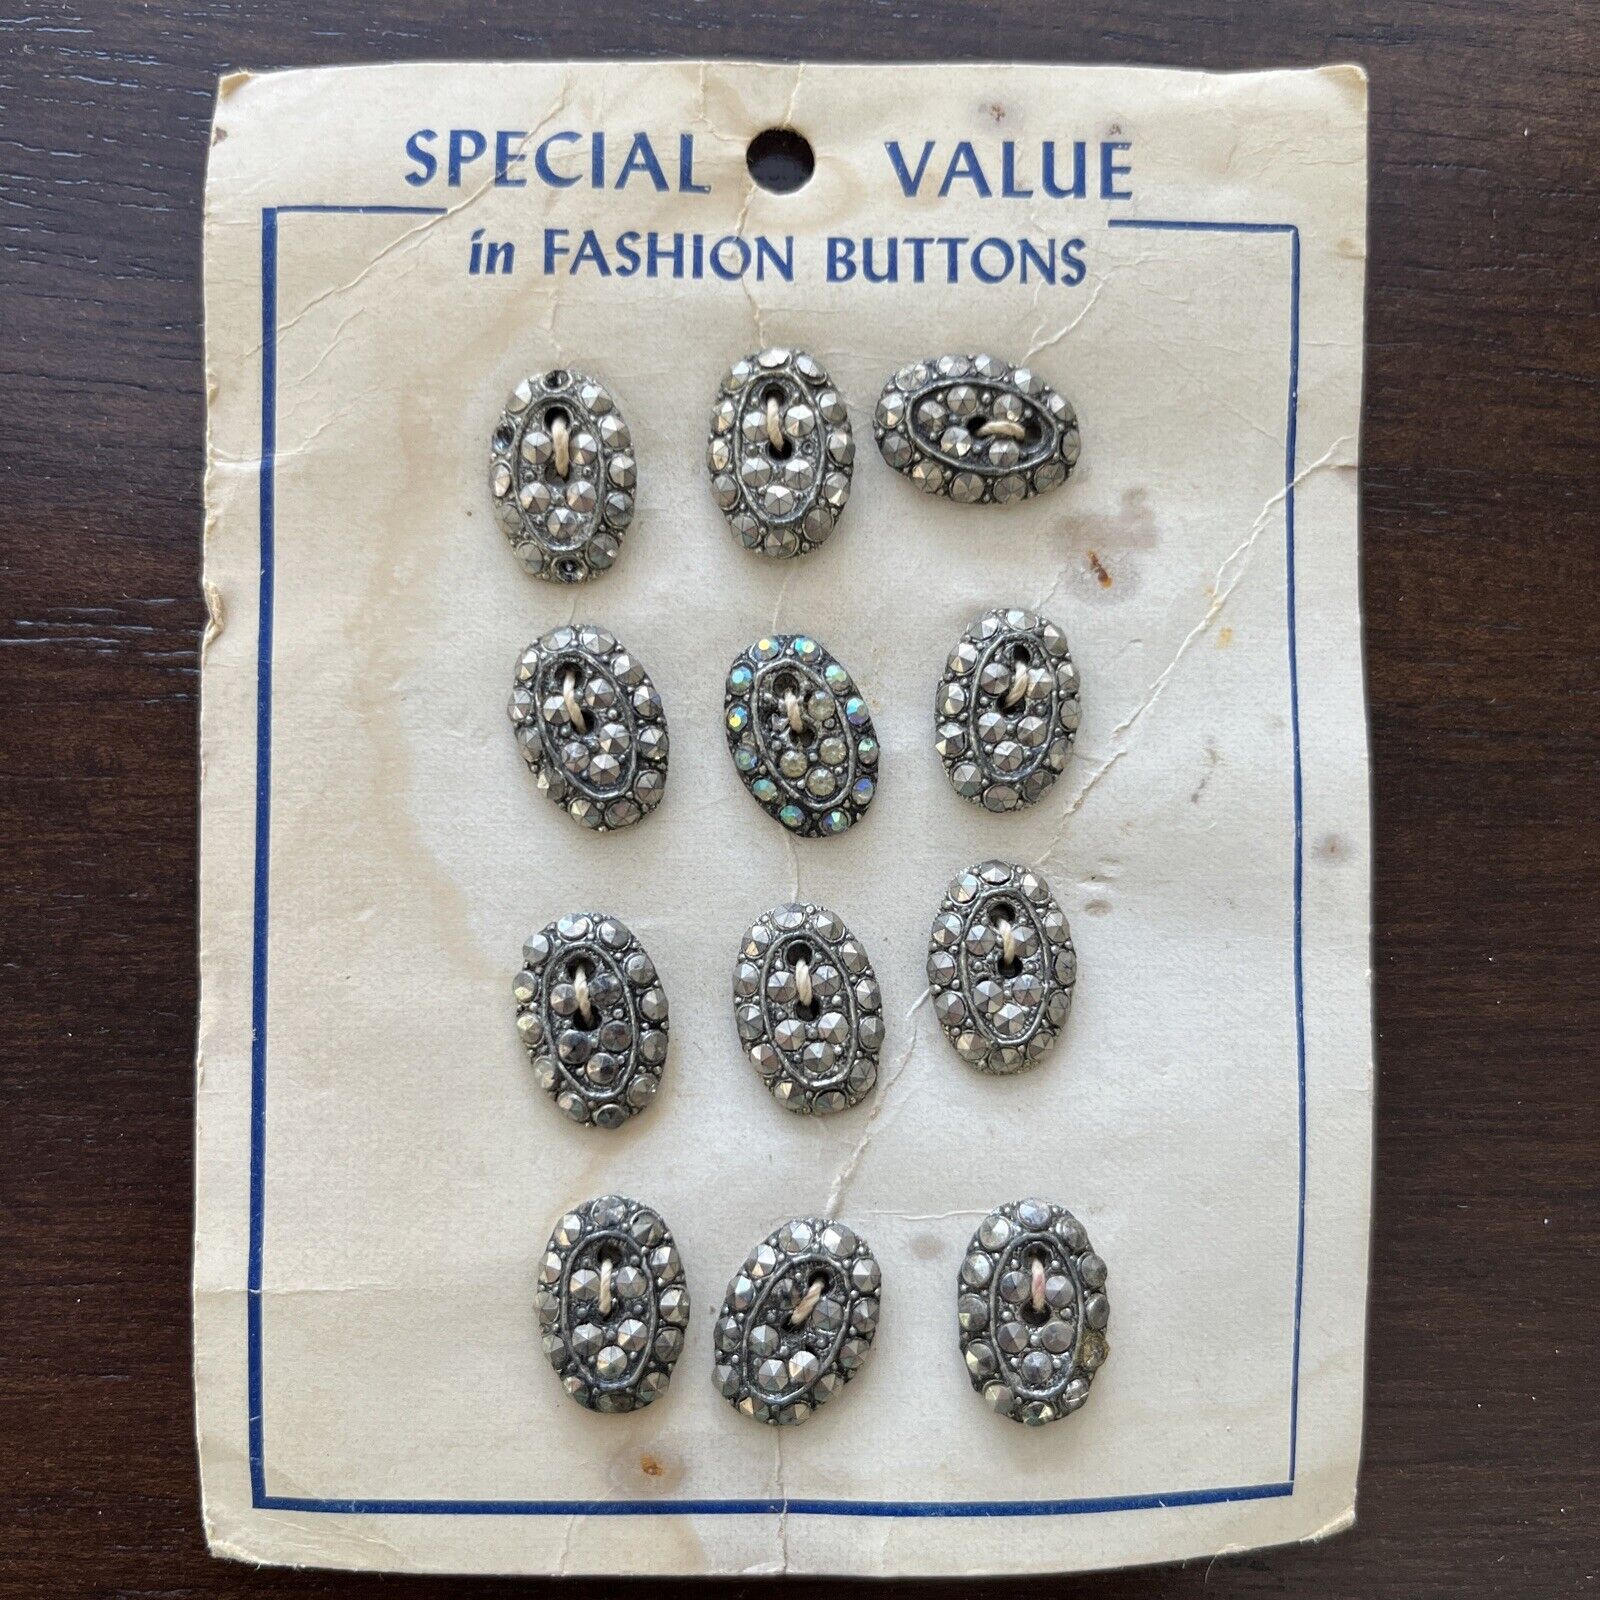 12 Vintage Fashion Shiny Oval Buttons Special Value on Card Cut Rhinestone Style